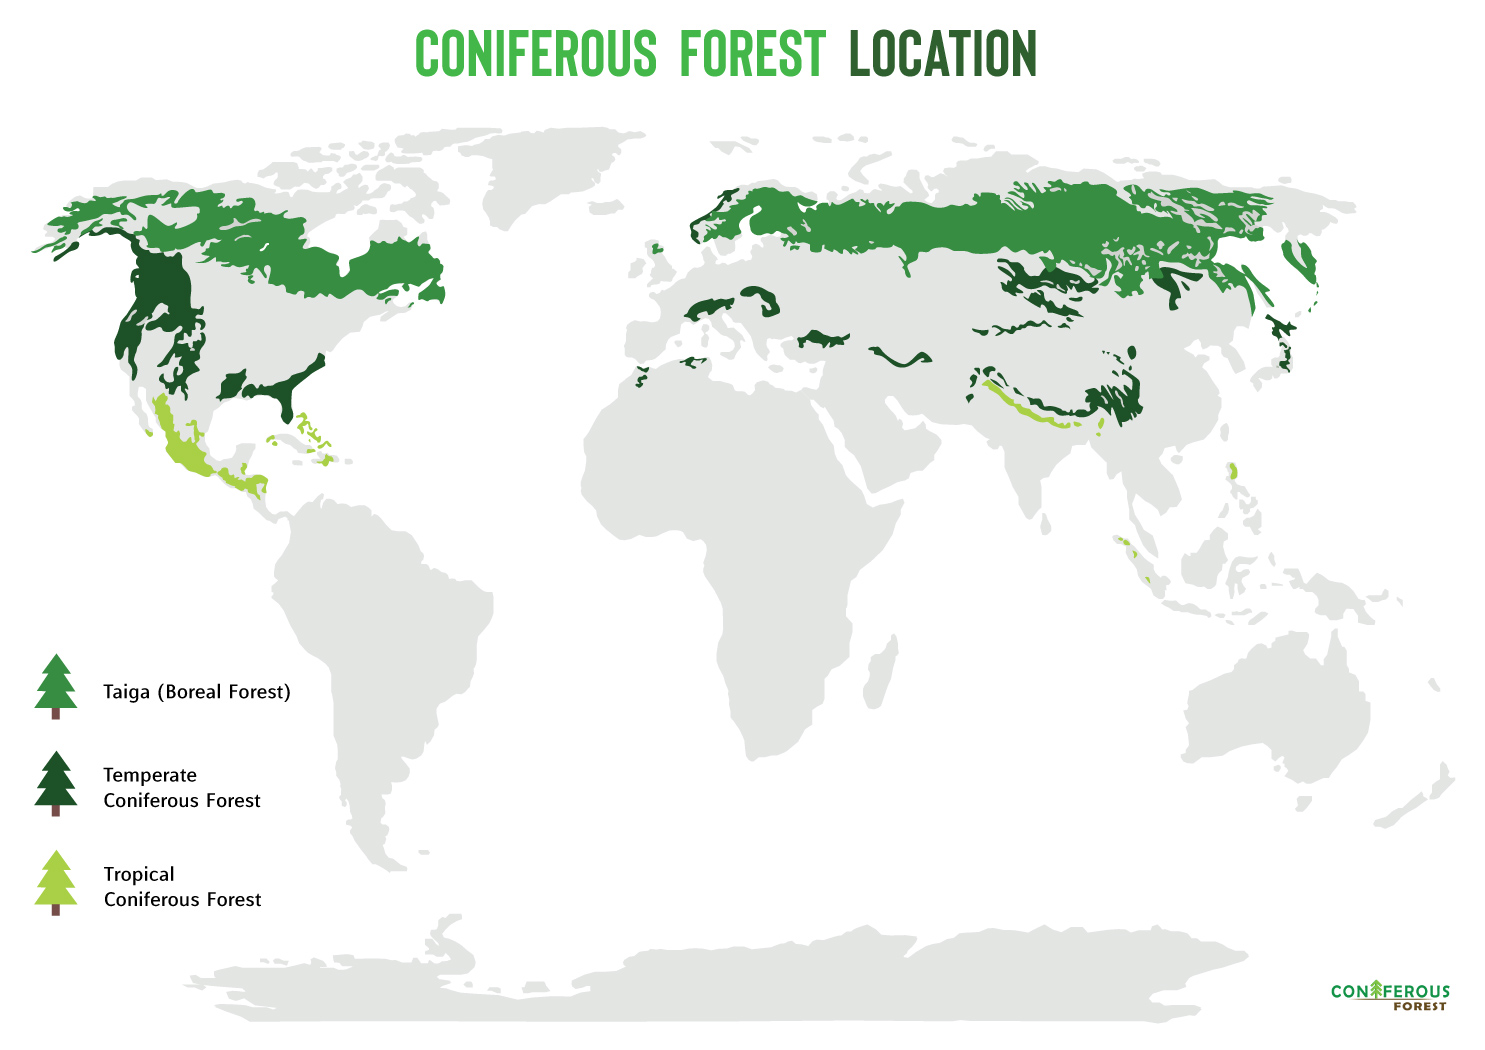 Coniferous Forest: Definition and Facts About the Biome